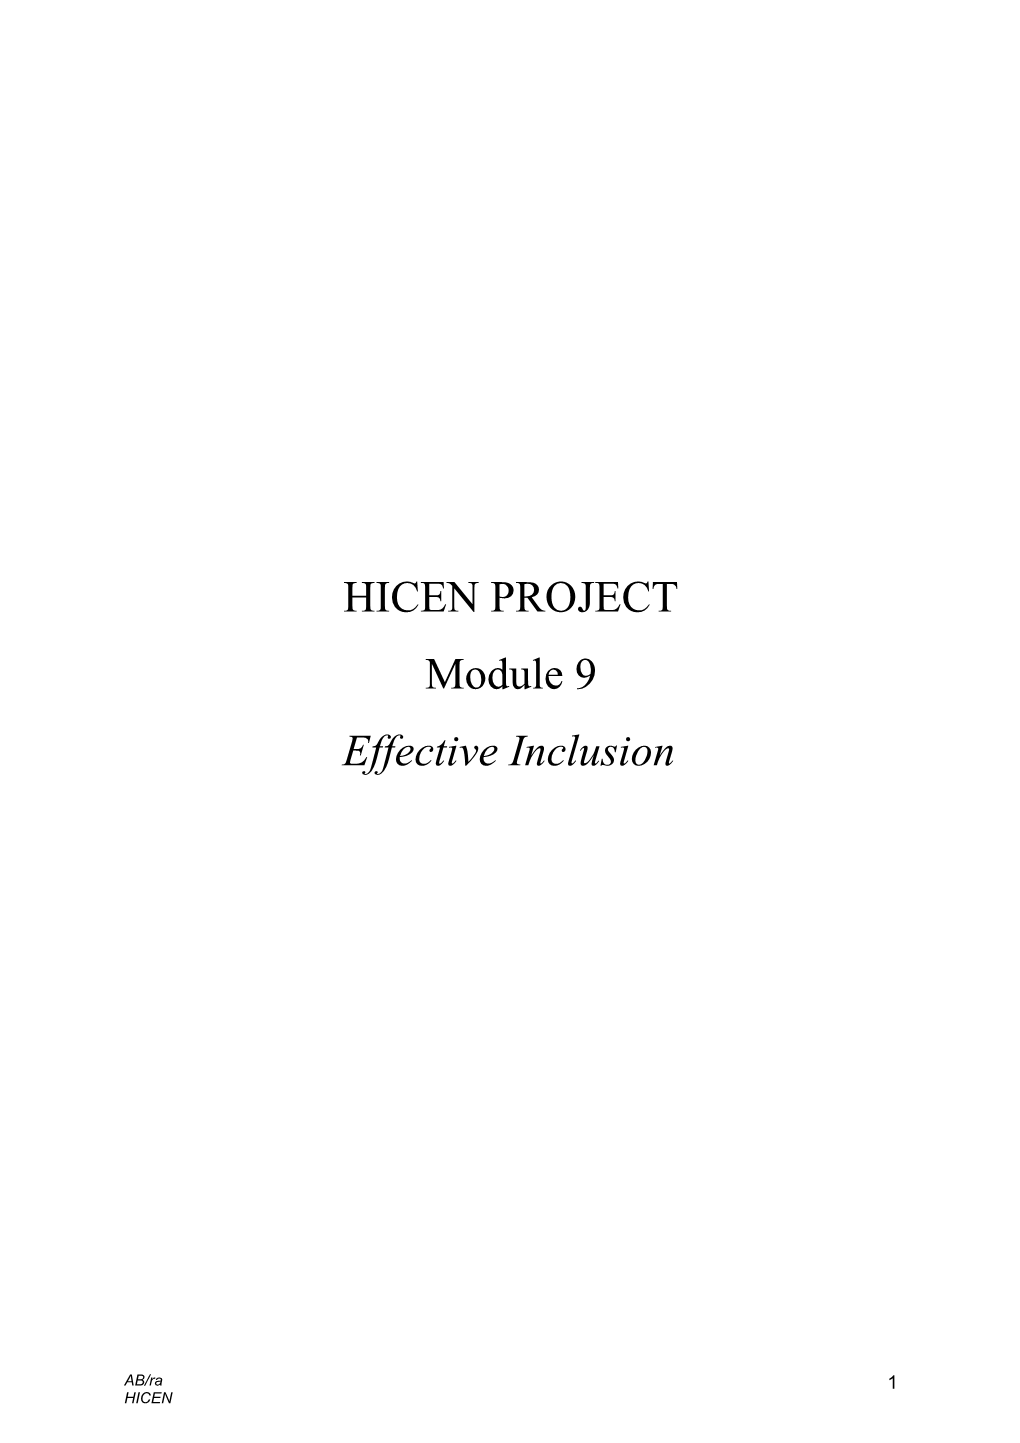 Hicen Project